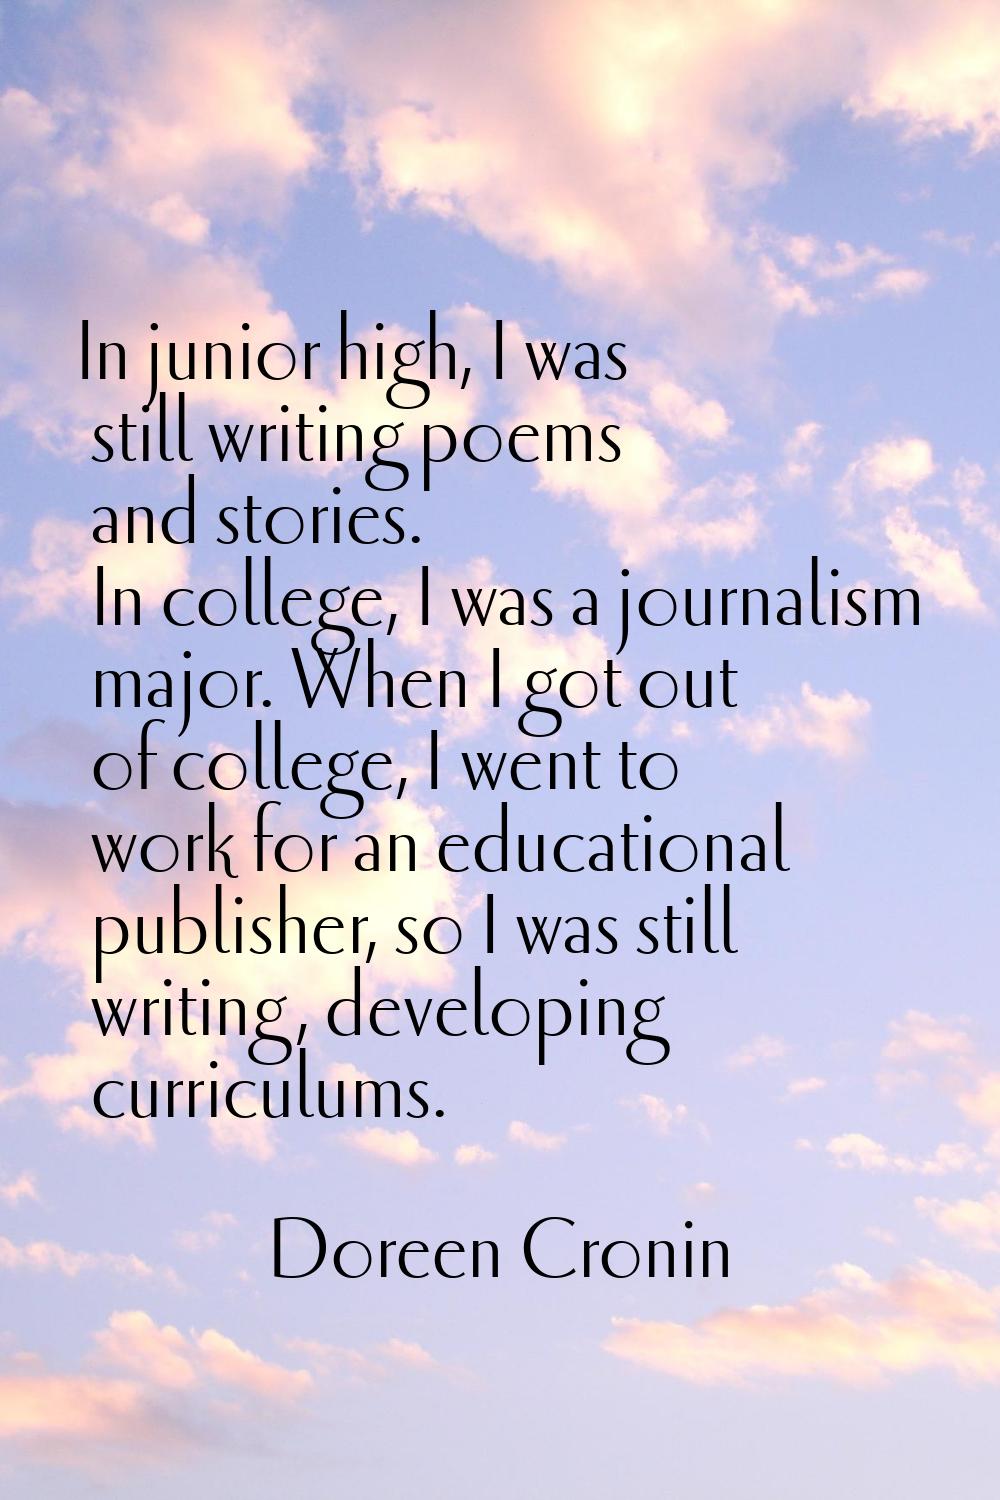 In junior high, I was still writing poems and stories. In college, I was a journalism major. When I